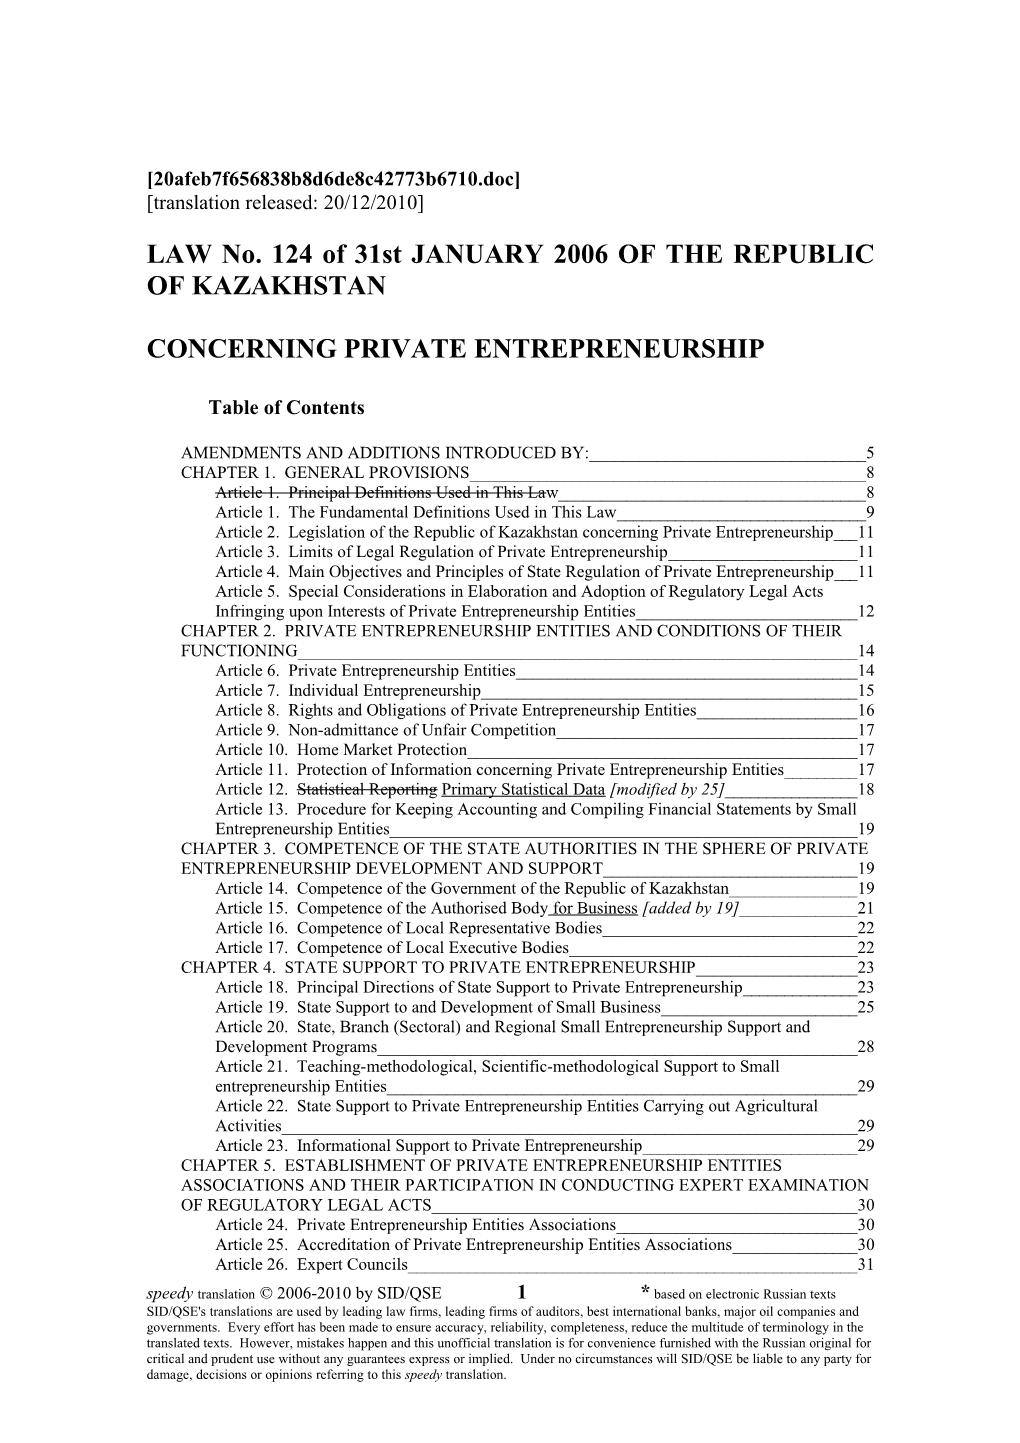 Law No. 124 Revised and Updated